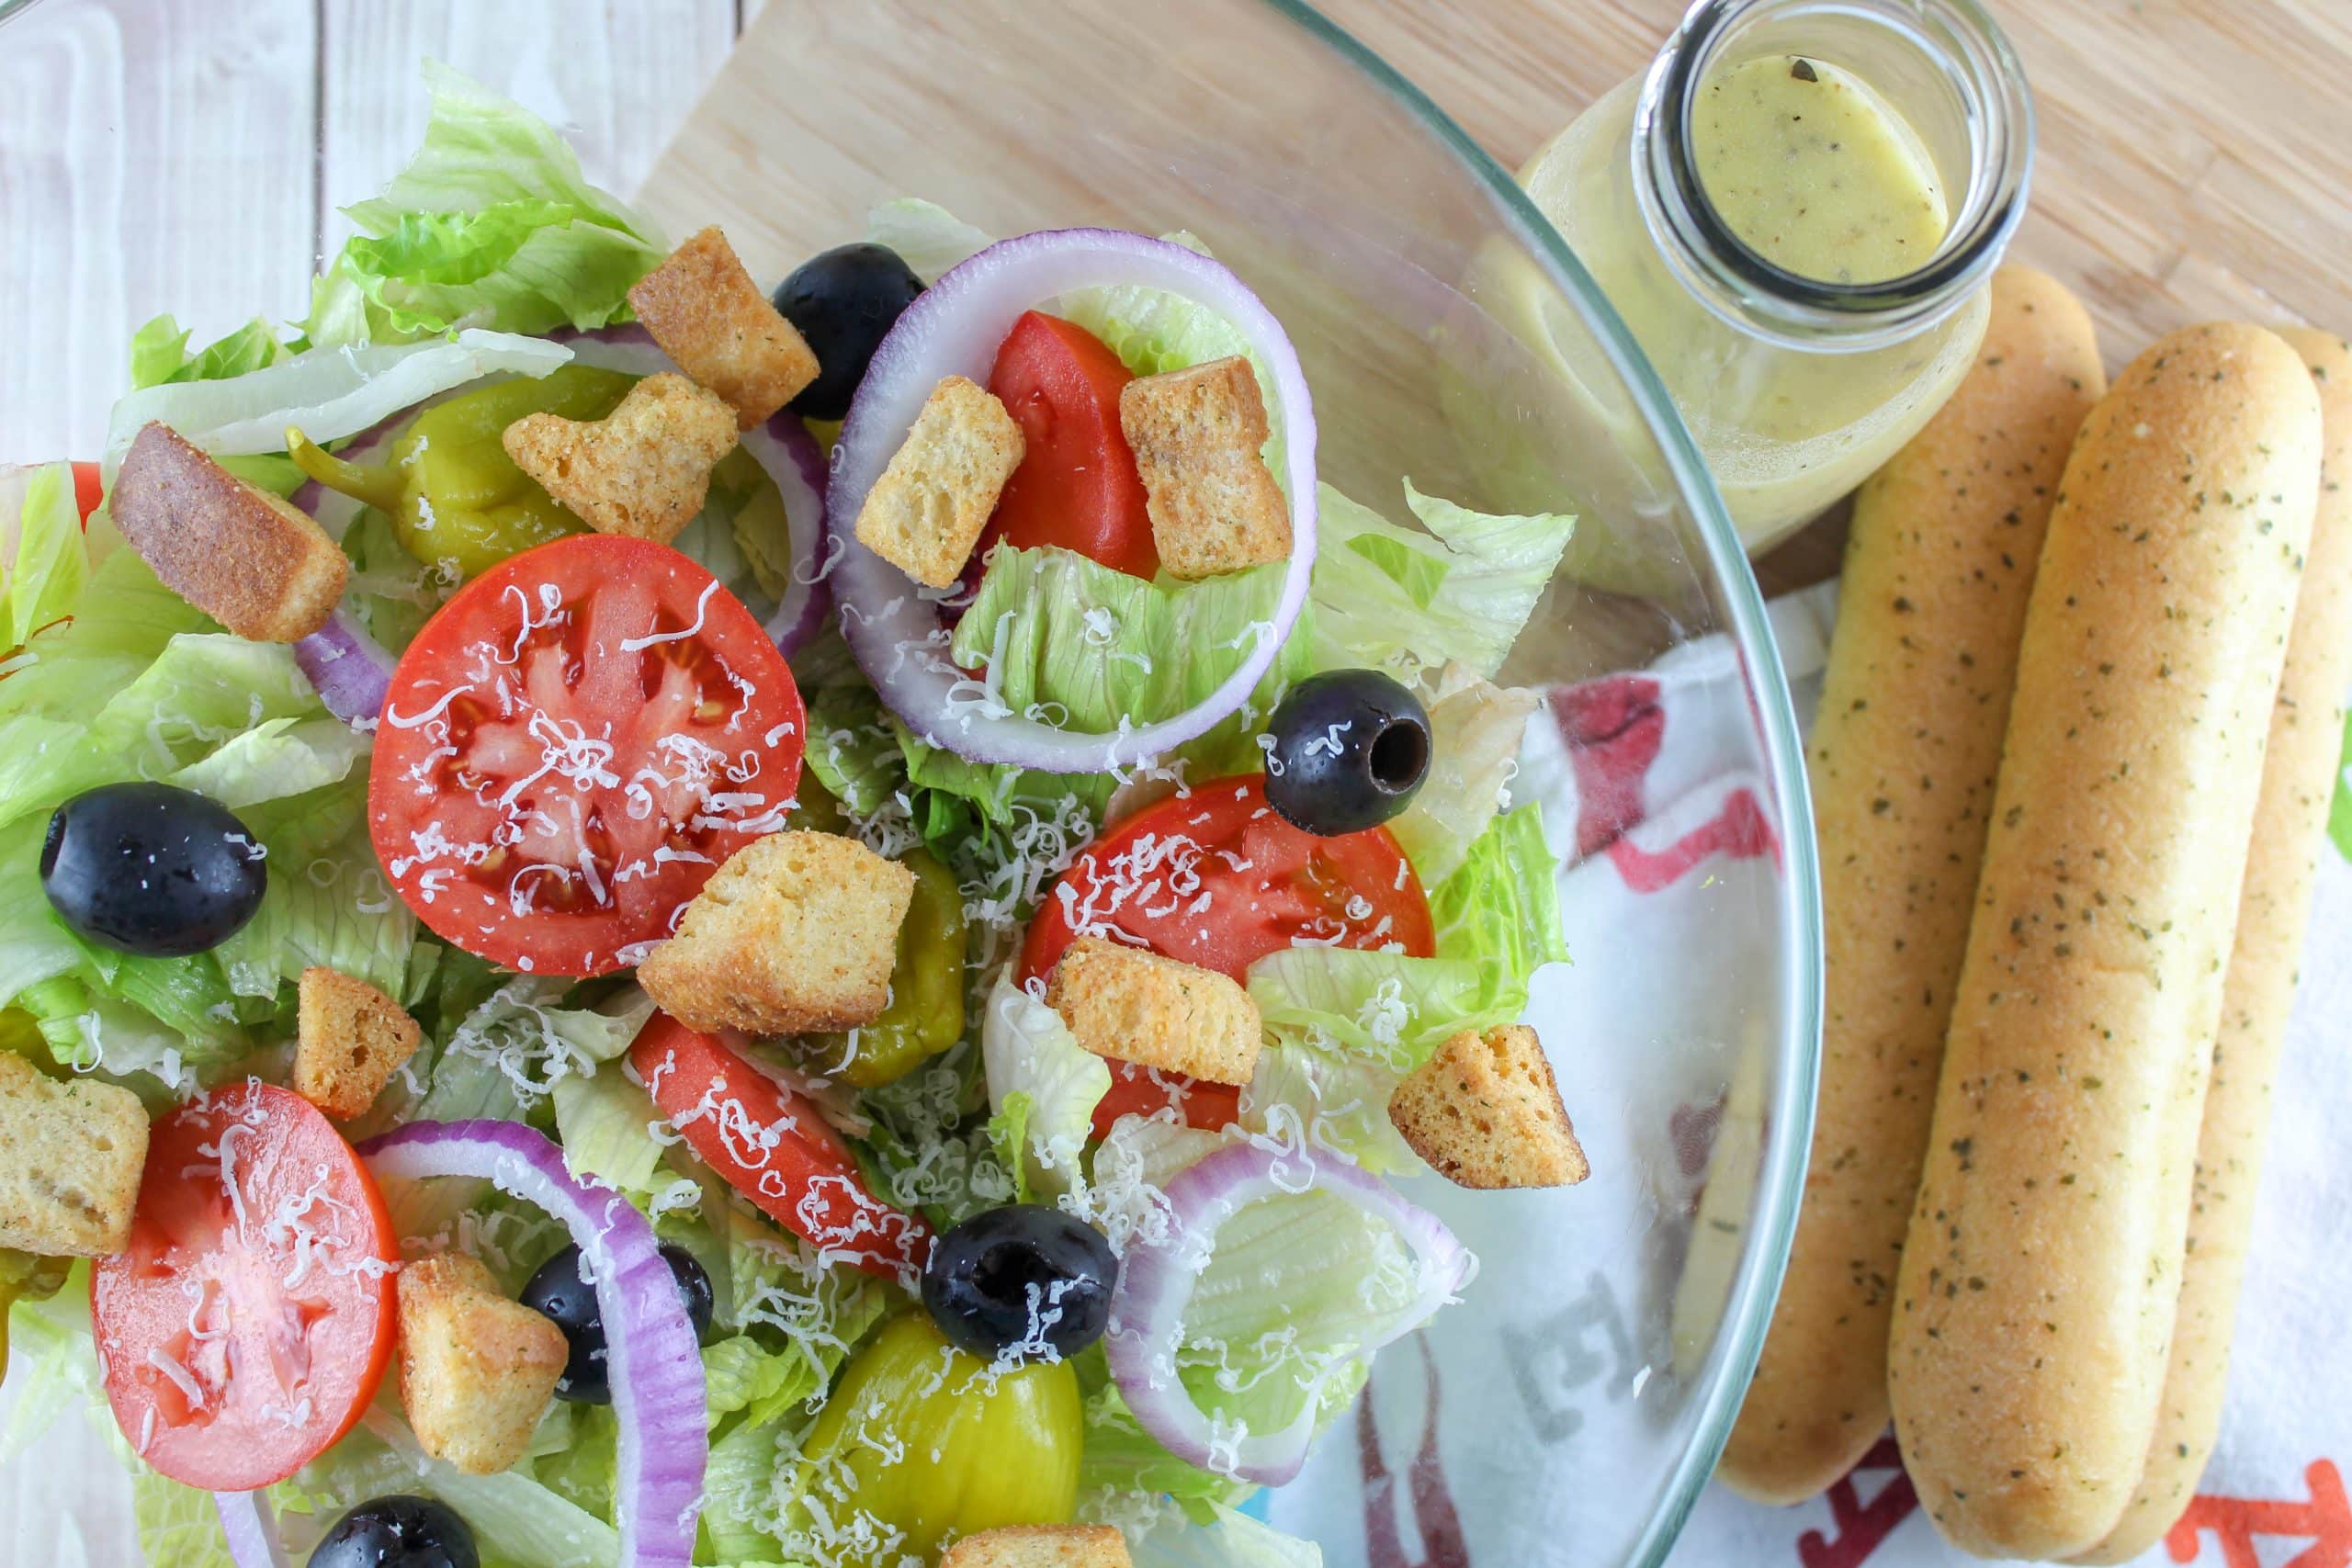 Olive Garden Salad Recipe (Dairy Free, Vegan Option) - Simply Whisked